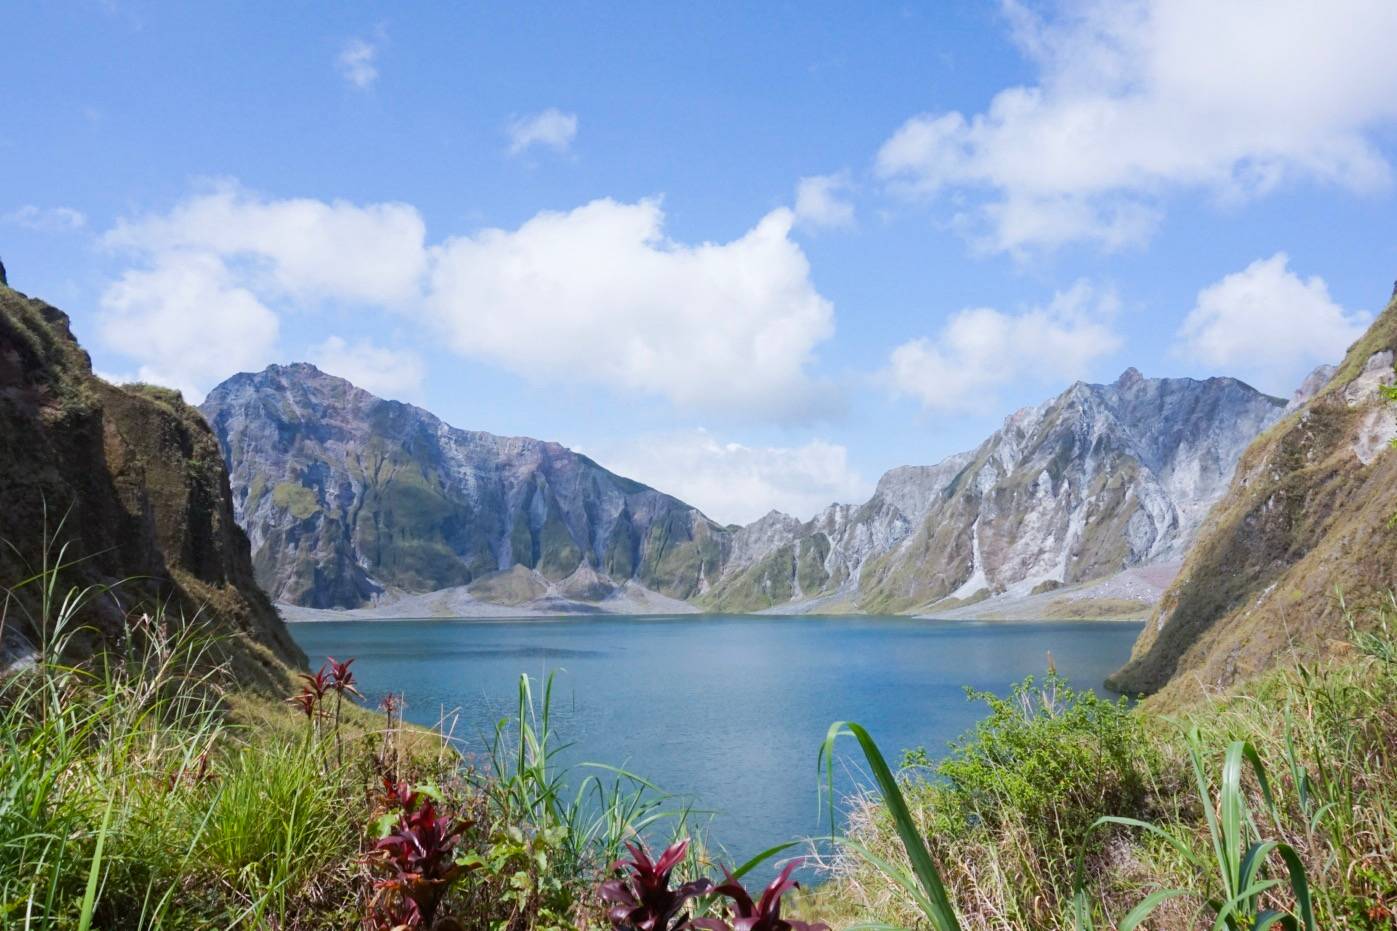 Mt. Pinatubo Trek: A lake within a crater